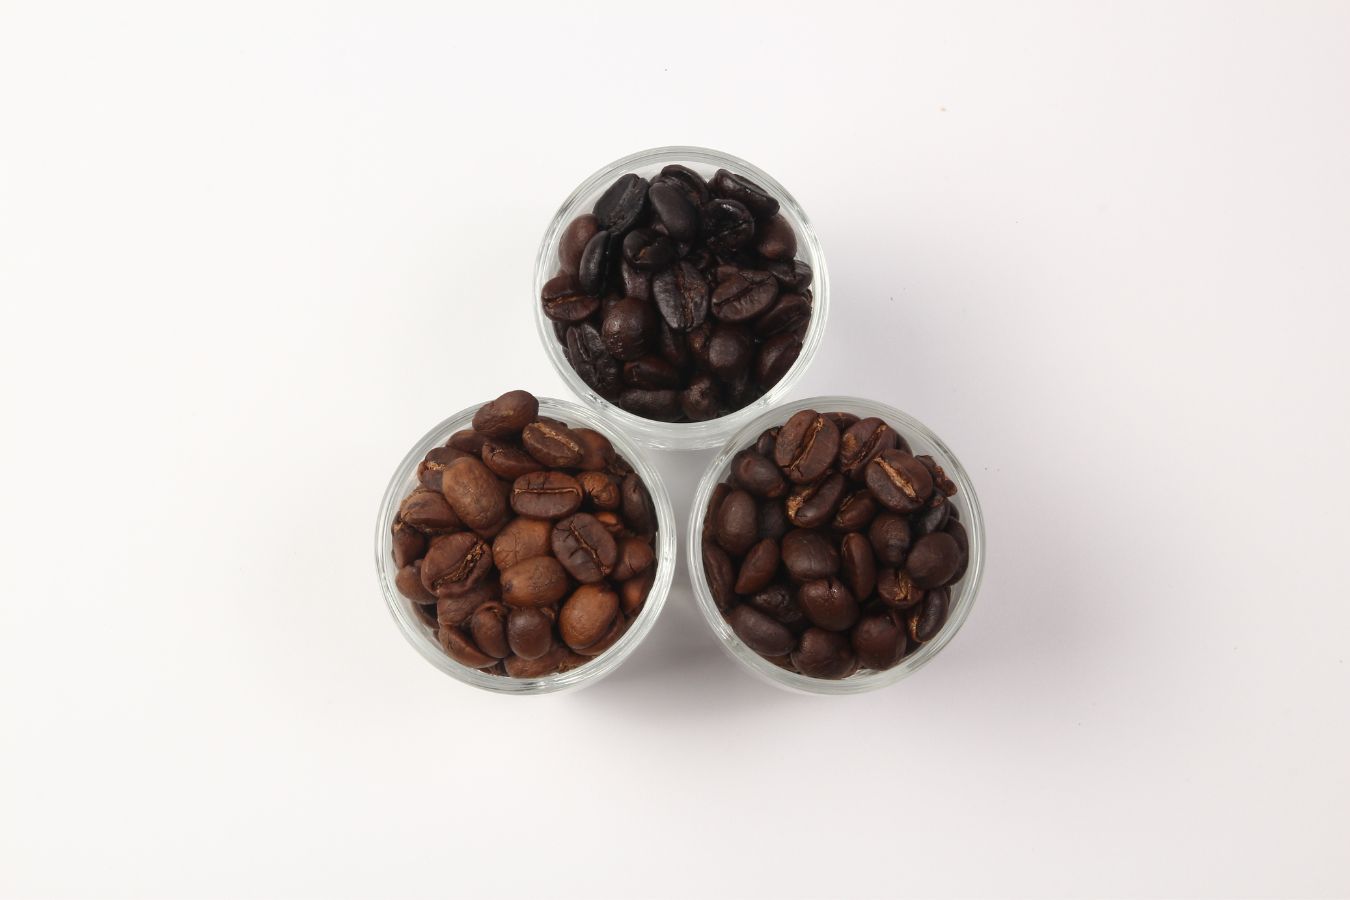 Roasting Levels Affect the Coffee Taste